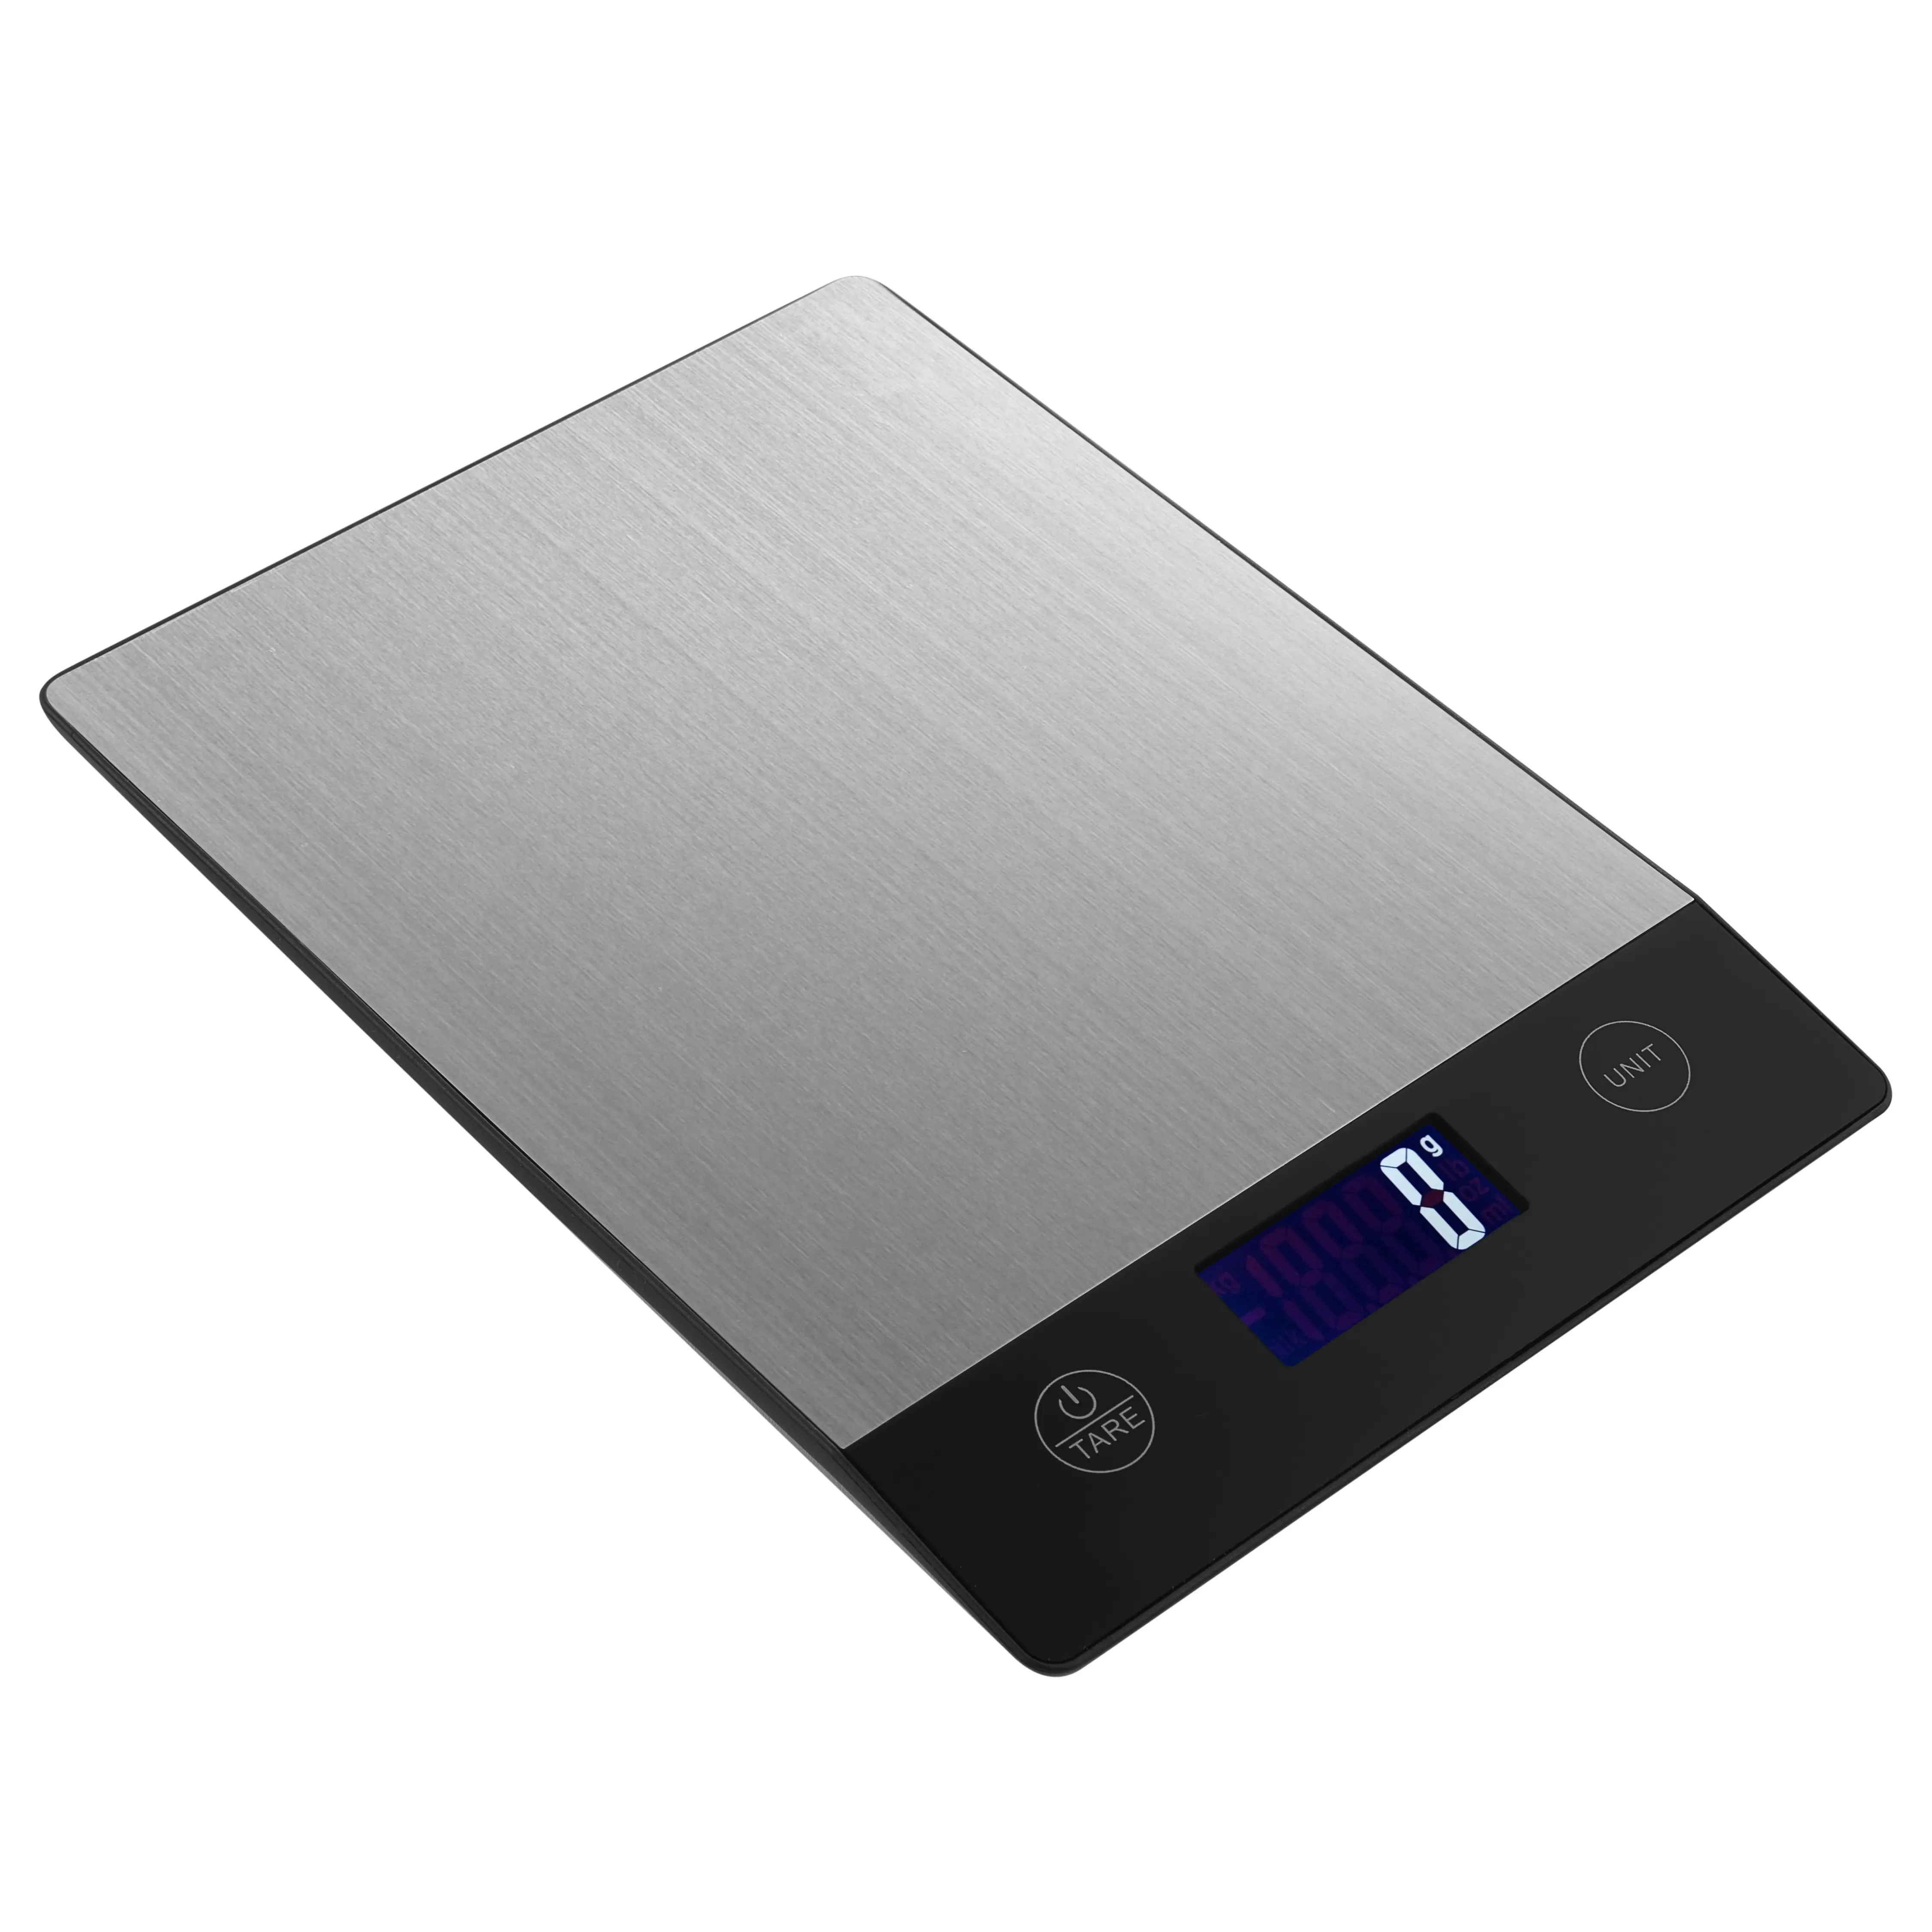 Large Lcd Display Electronic 5kg Nutritional Weighing Digital Nutrition Scale